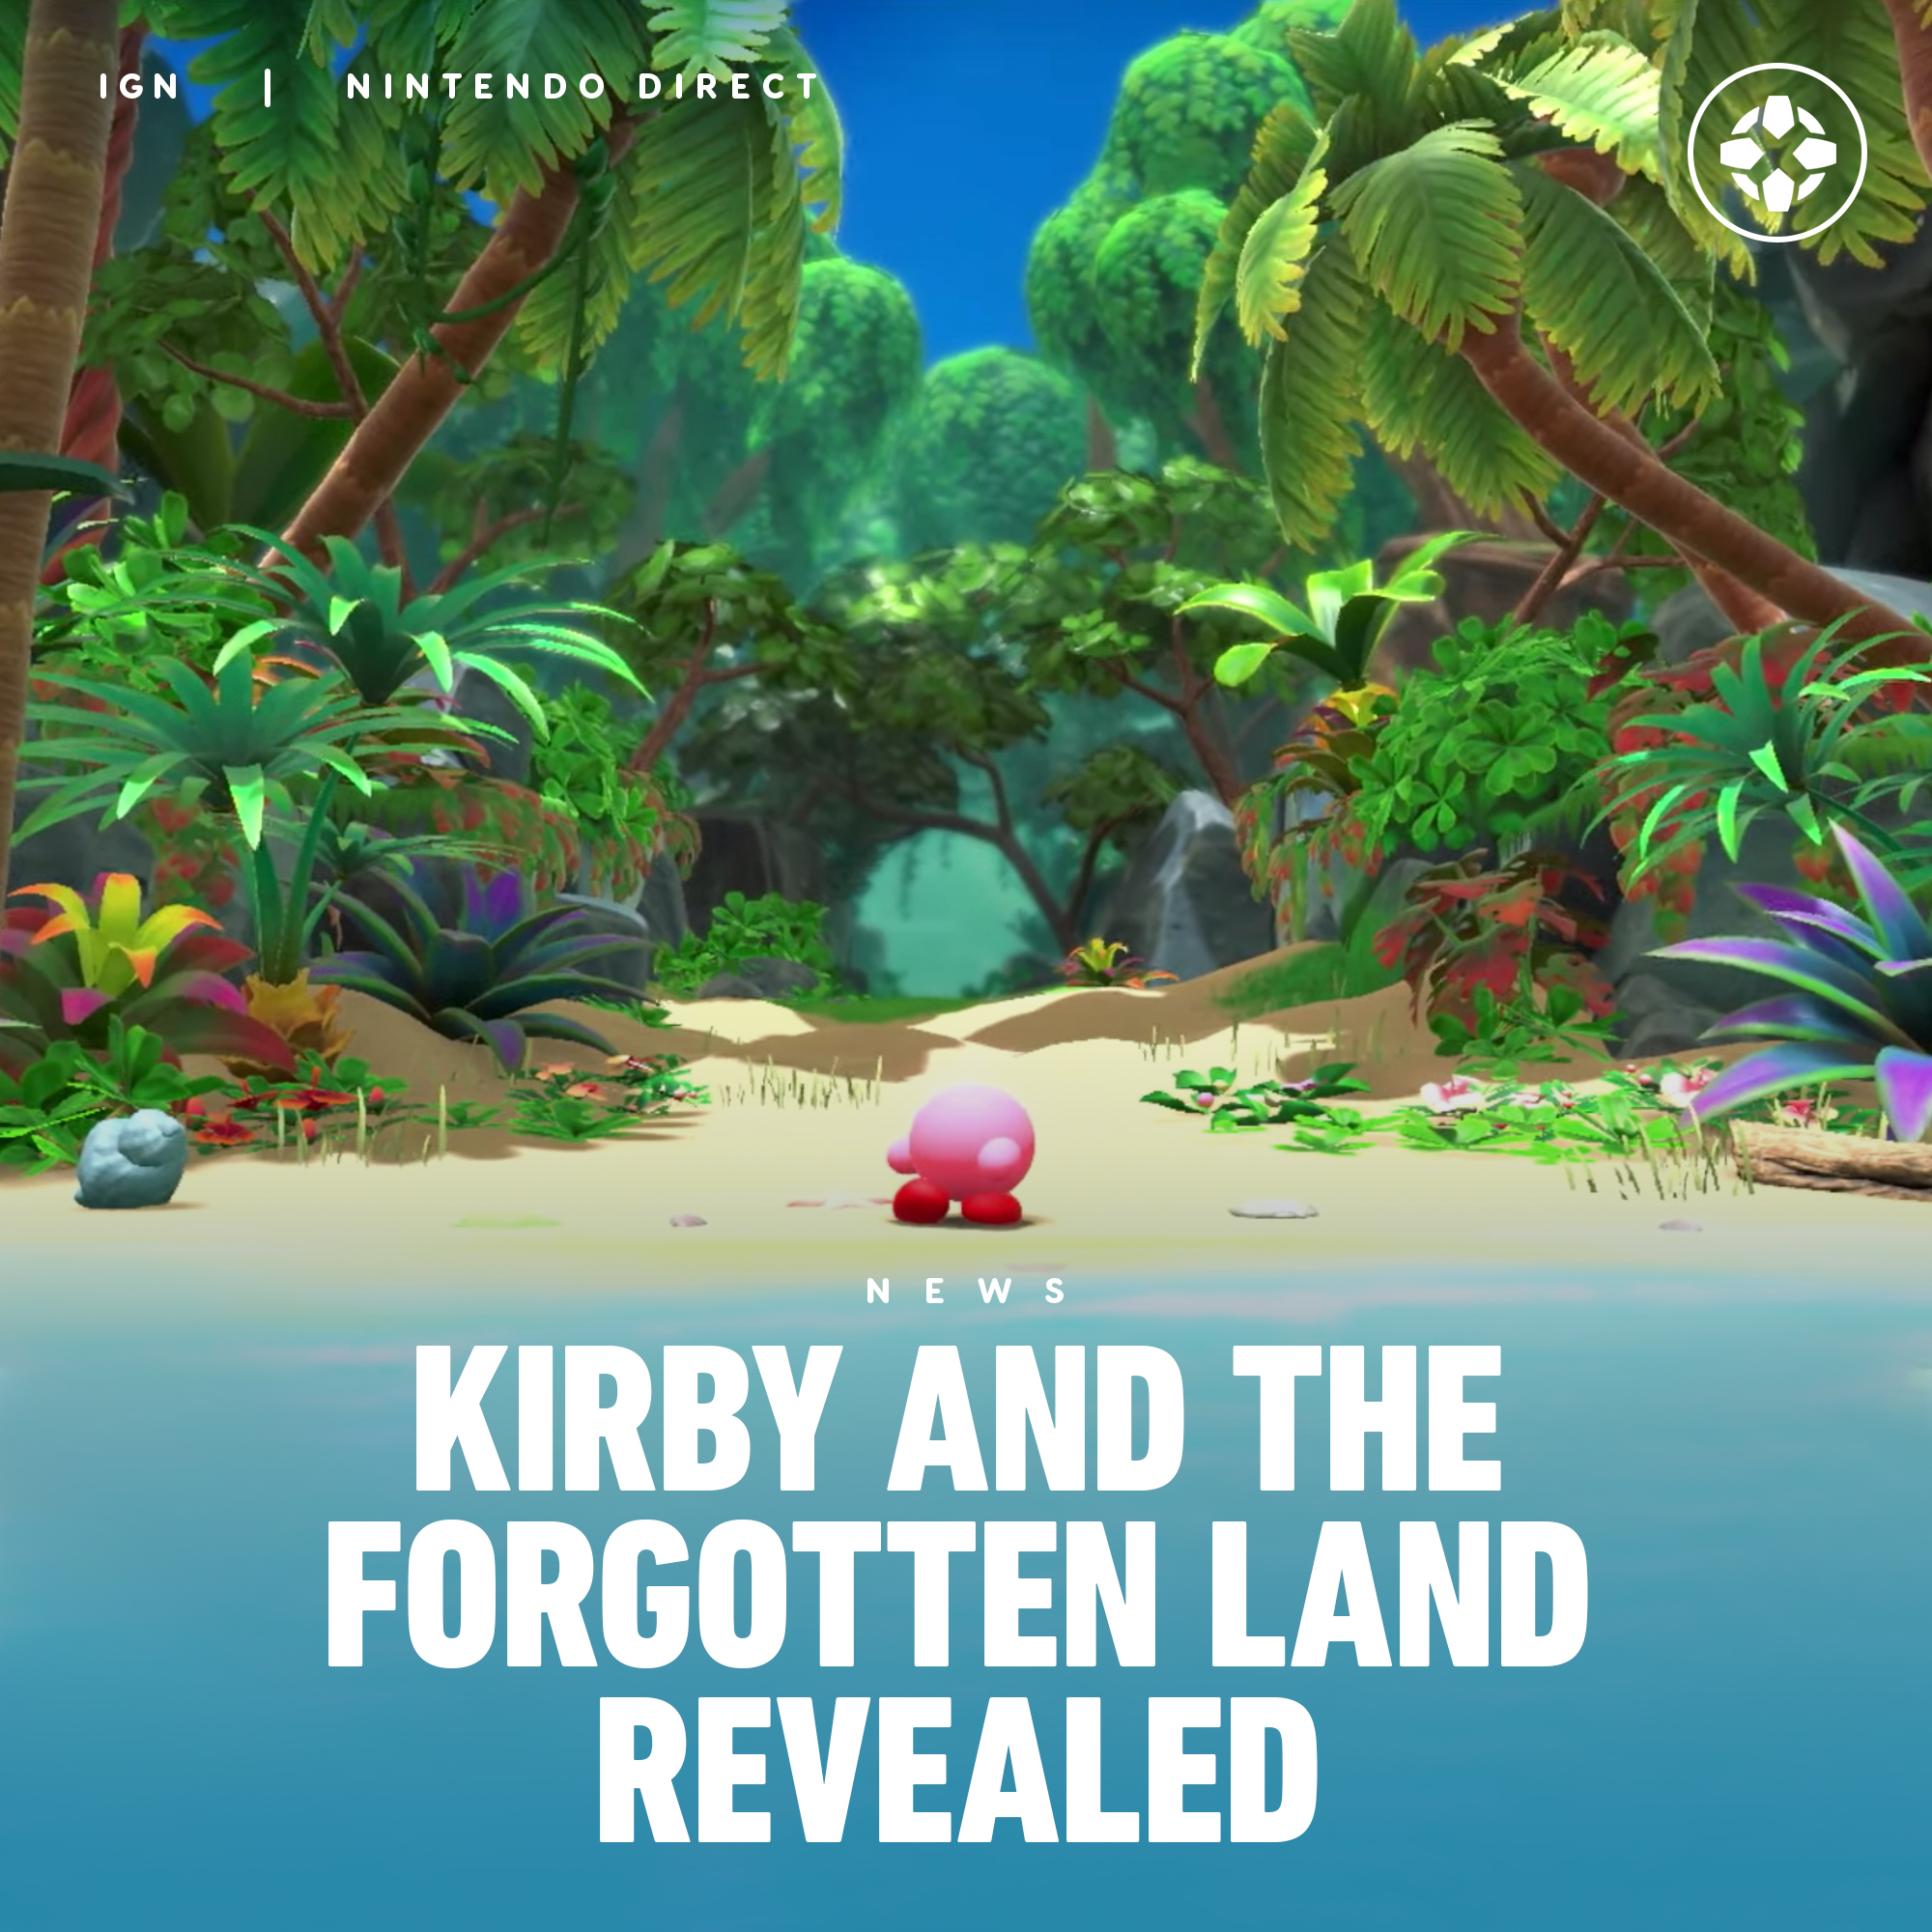 Kirby and the Forgotten Land - IGN